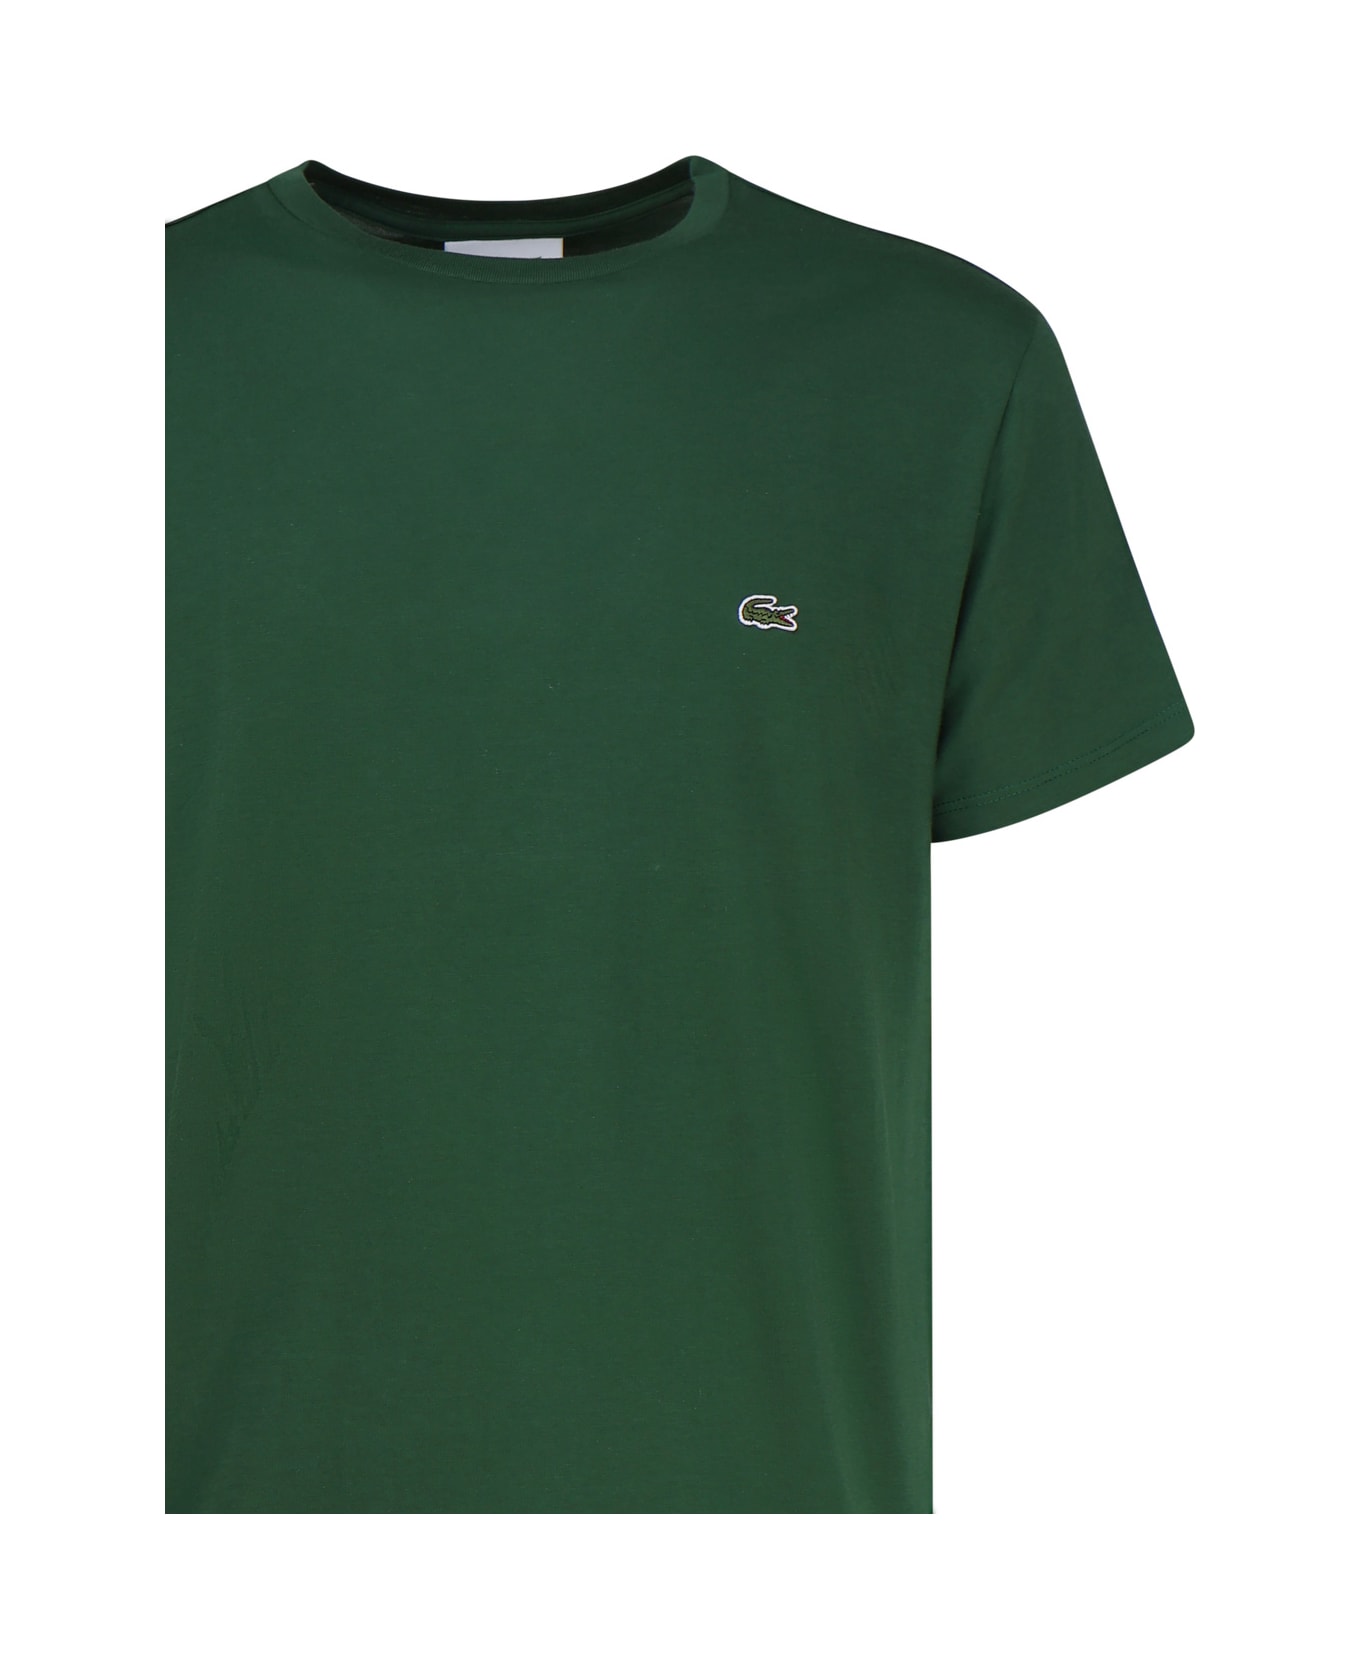 Lacoste Green T-shirt In Cotton Jersey - Green シャツ